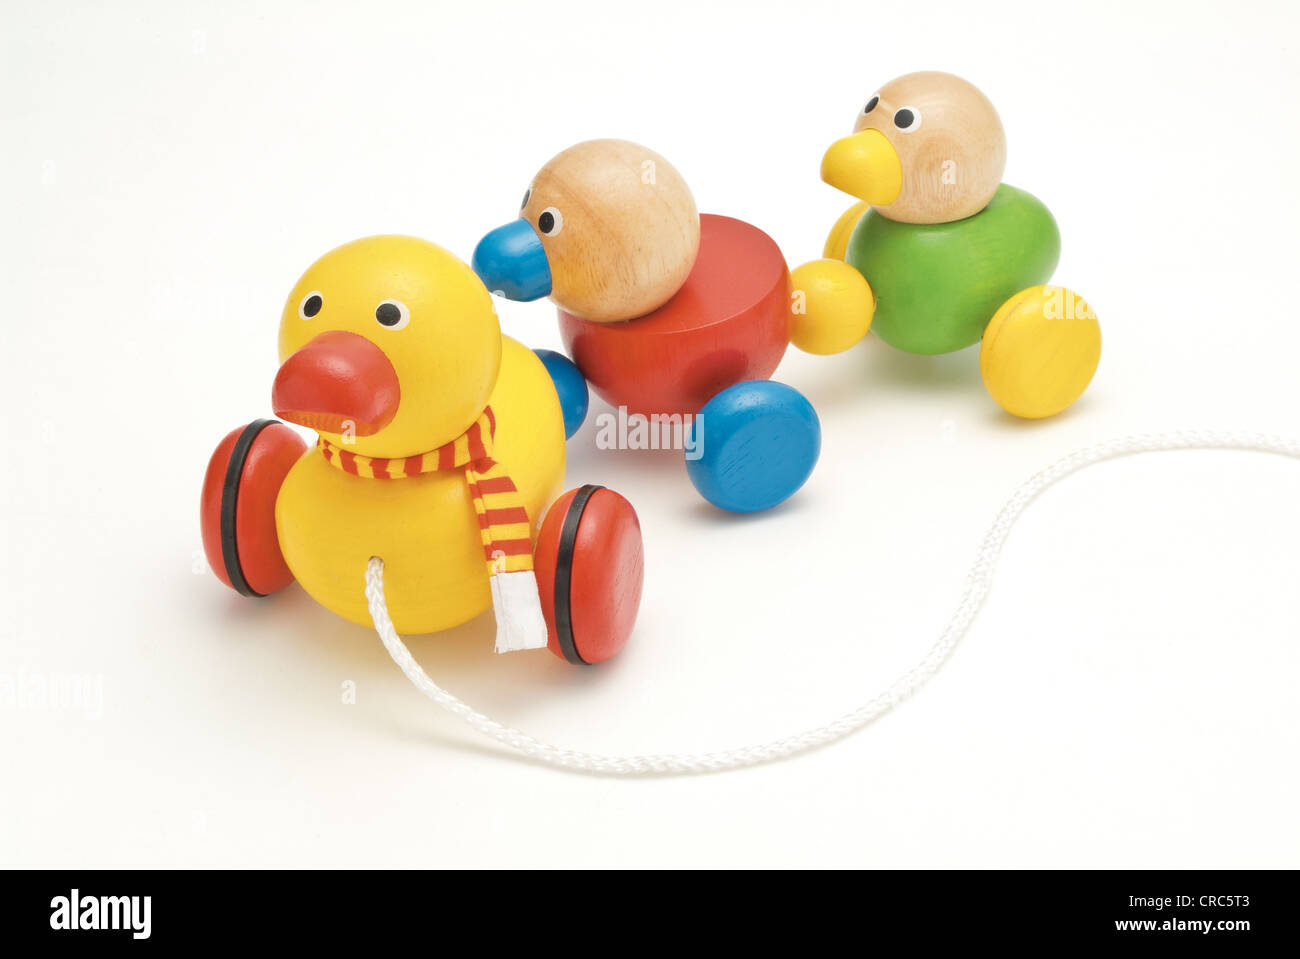 duck wood toy Stock Photo